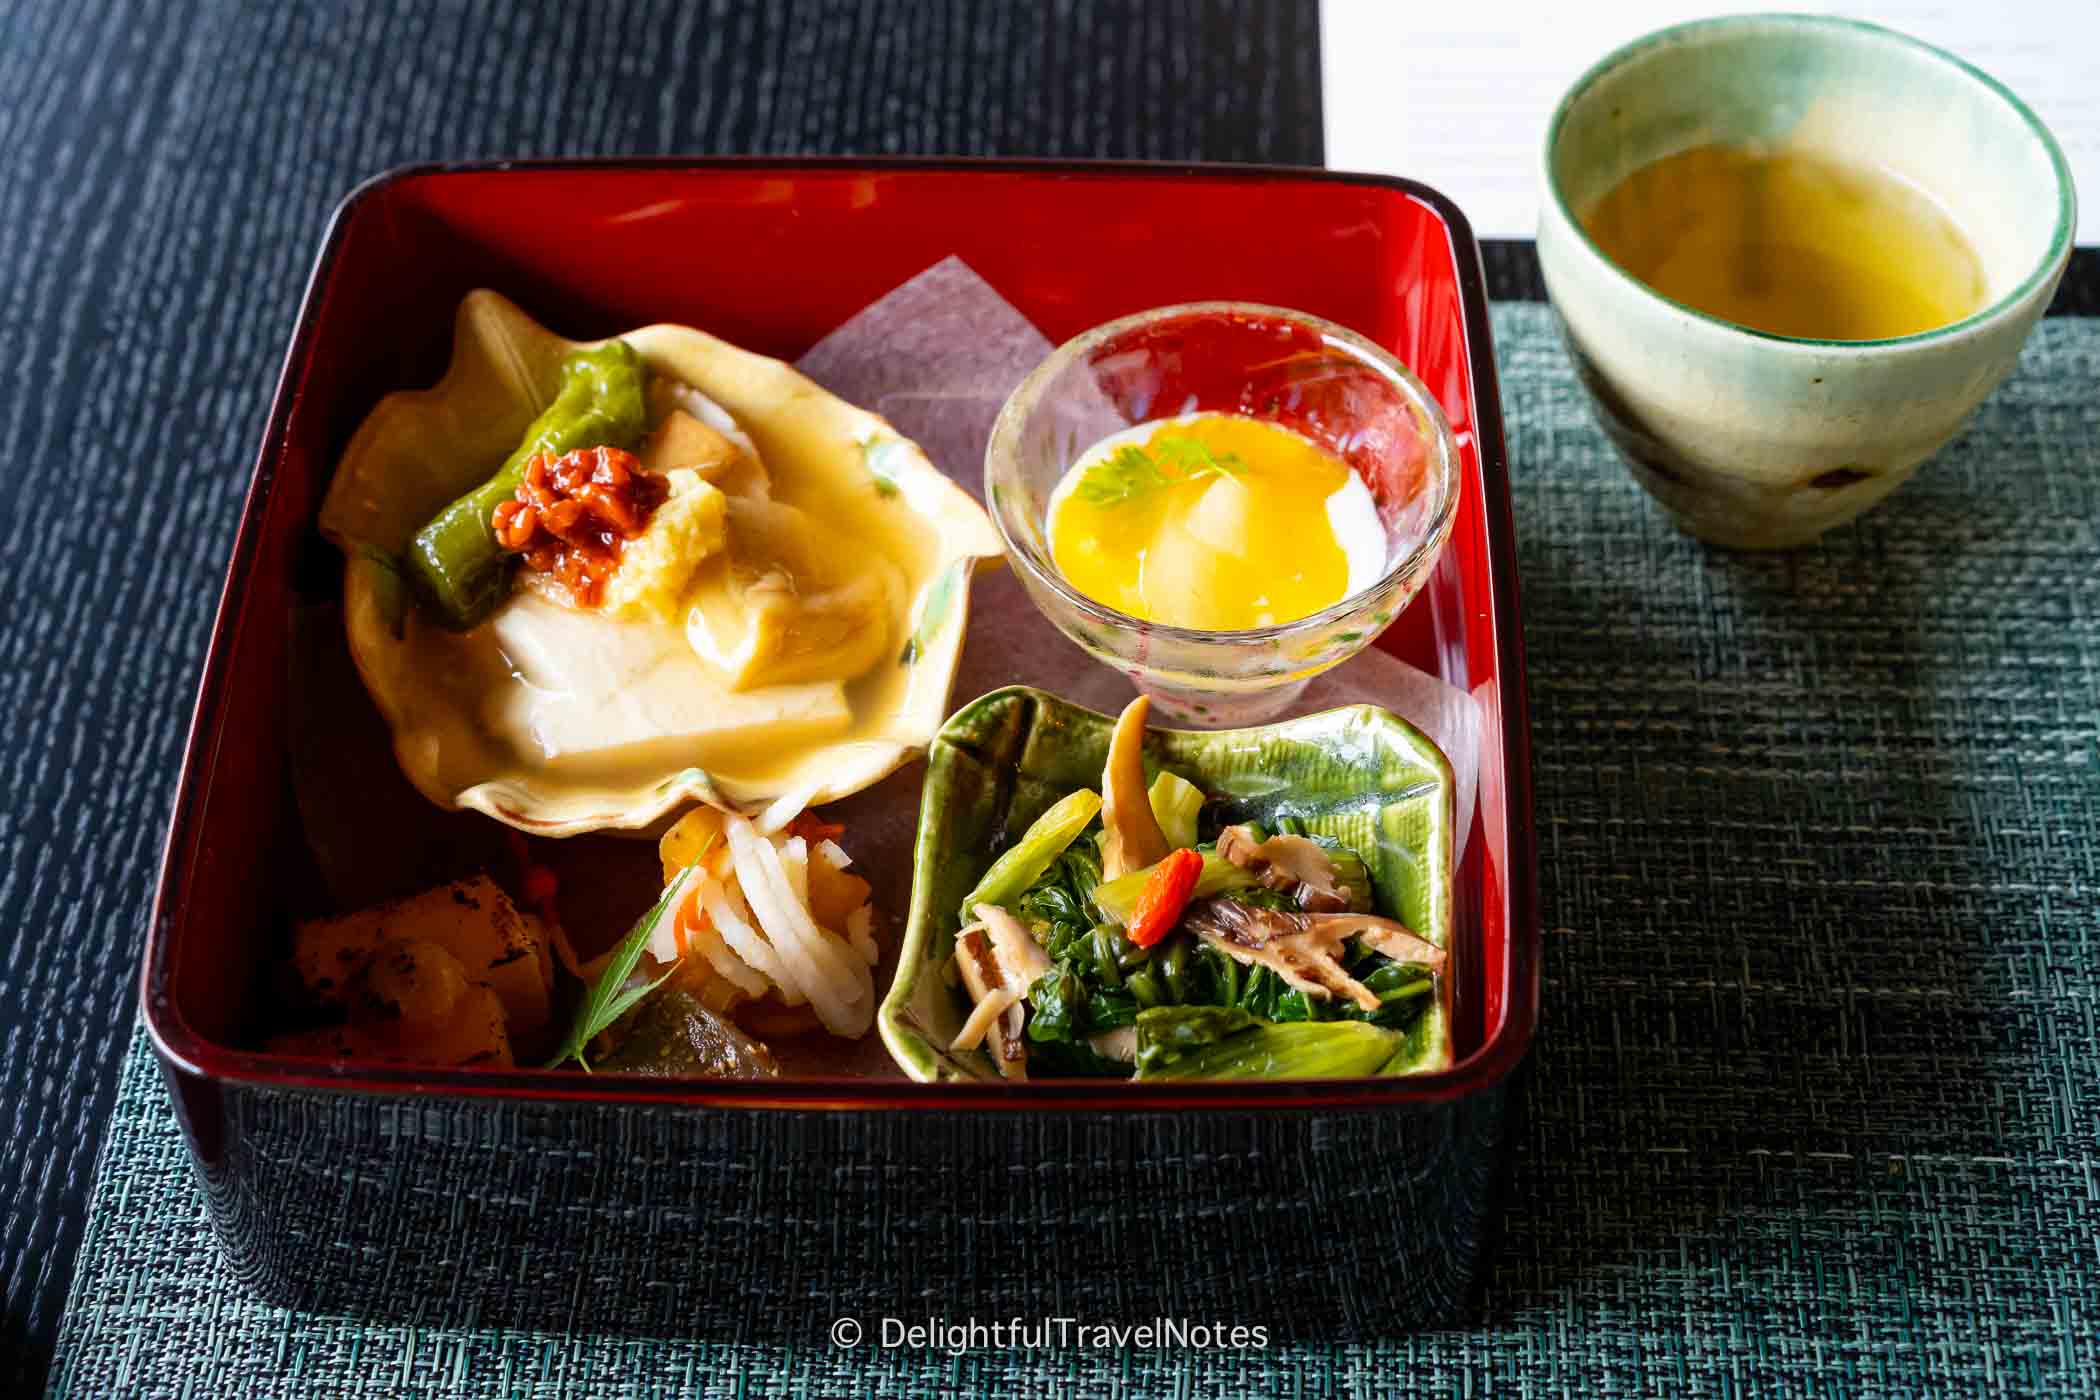 a box of small appetizers in the breakfast meal at Shisui hotel in Nara.